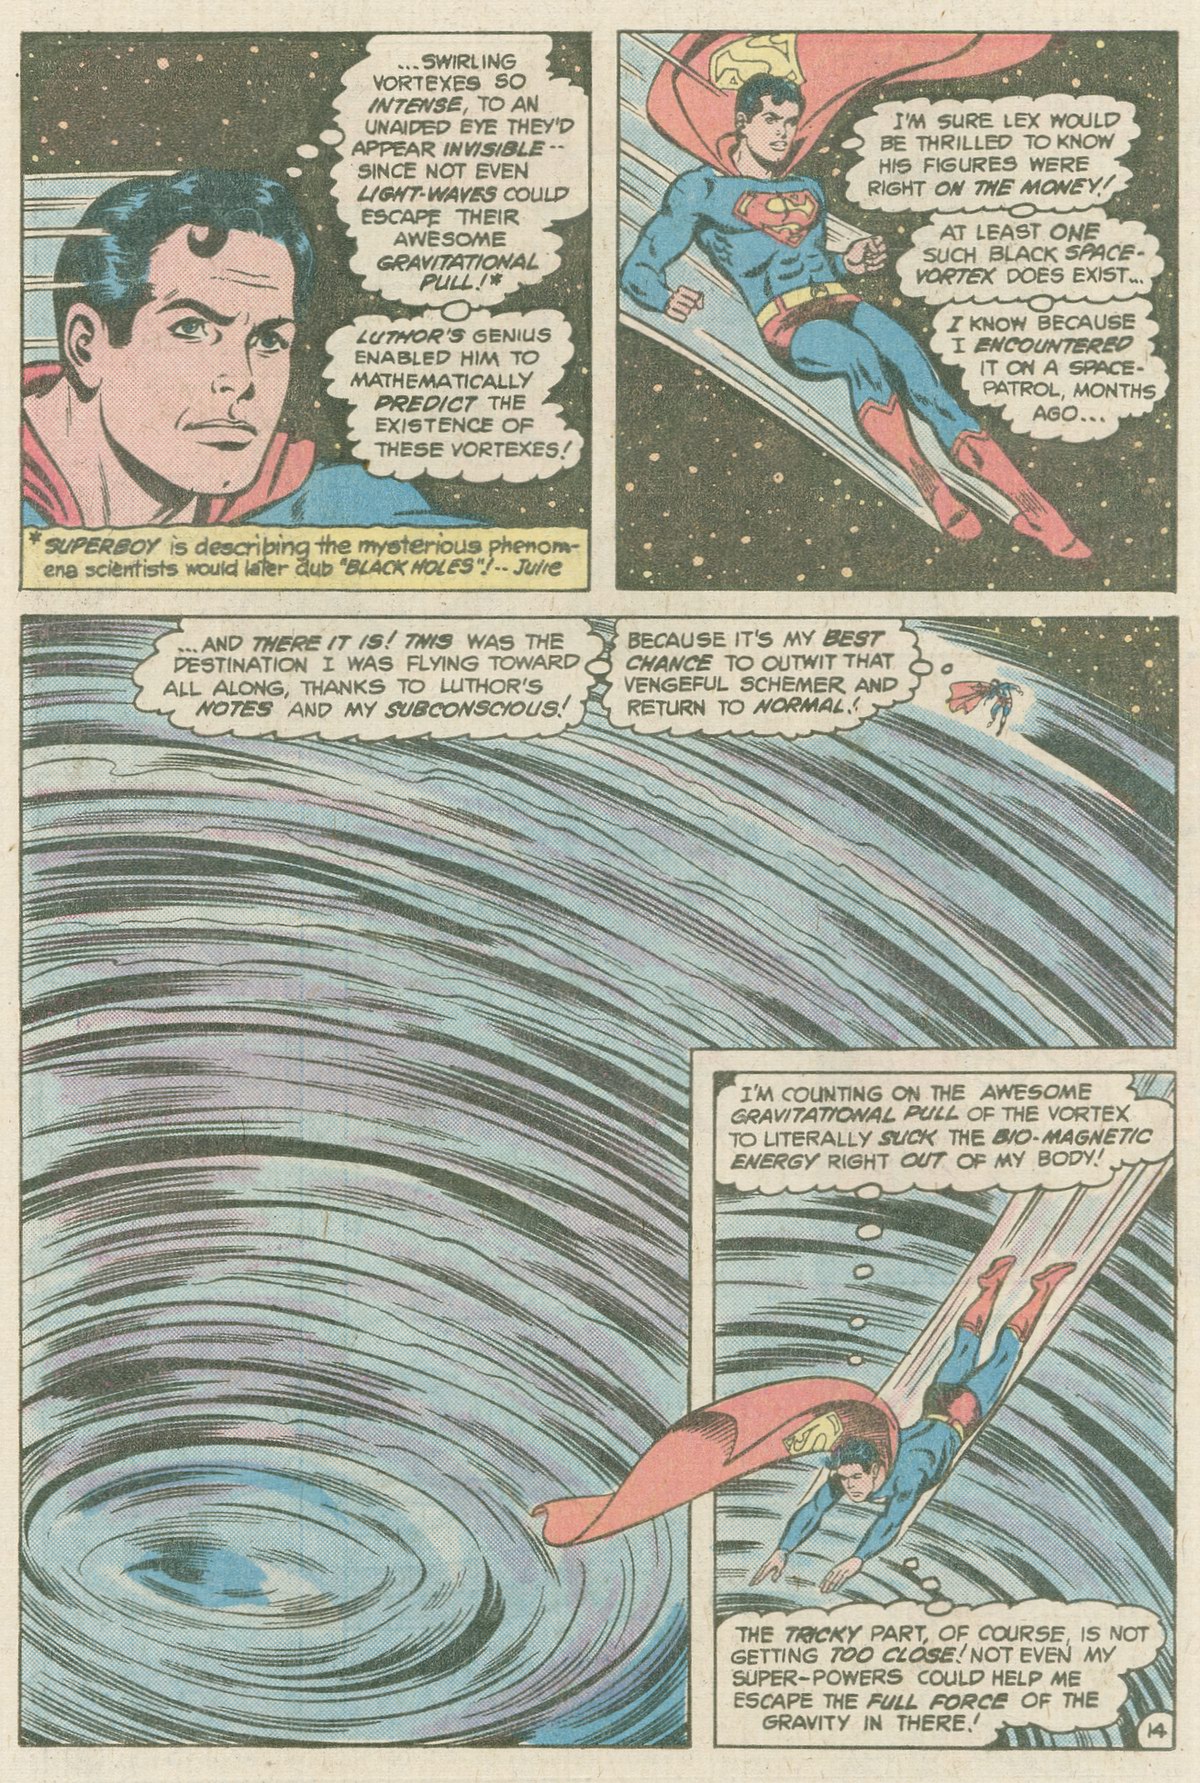 The New Adventures of Superboy 11 Page 14